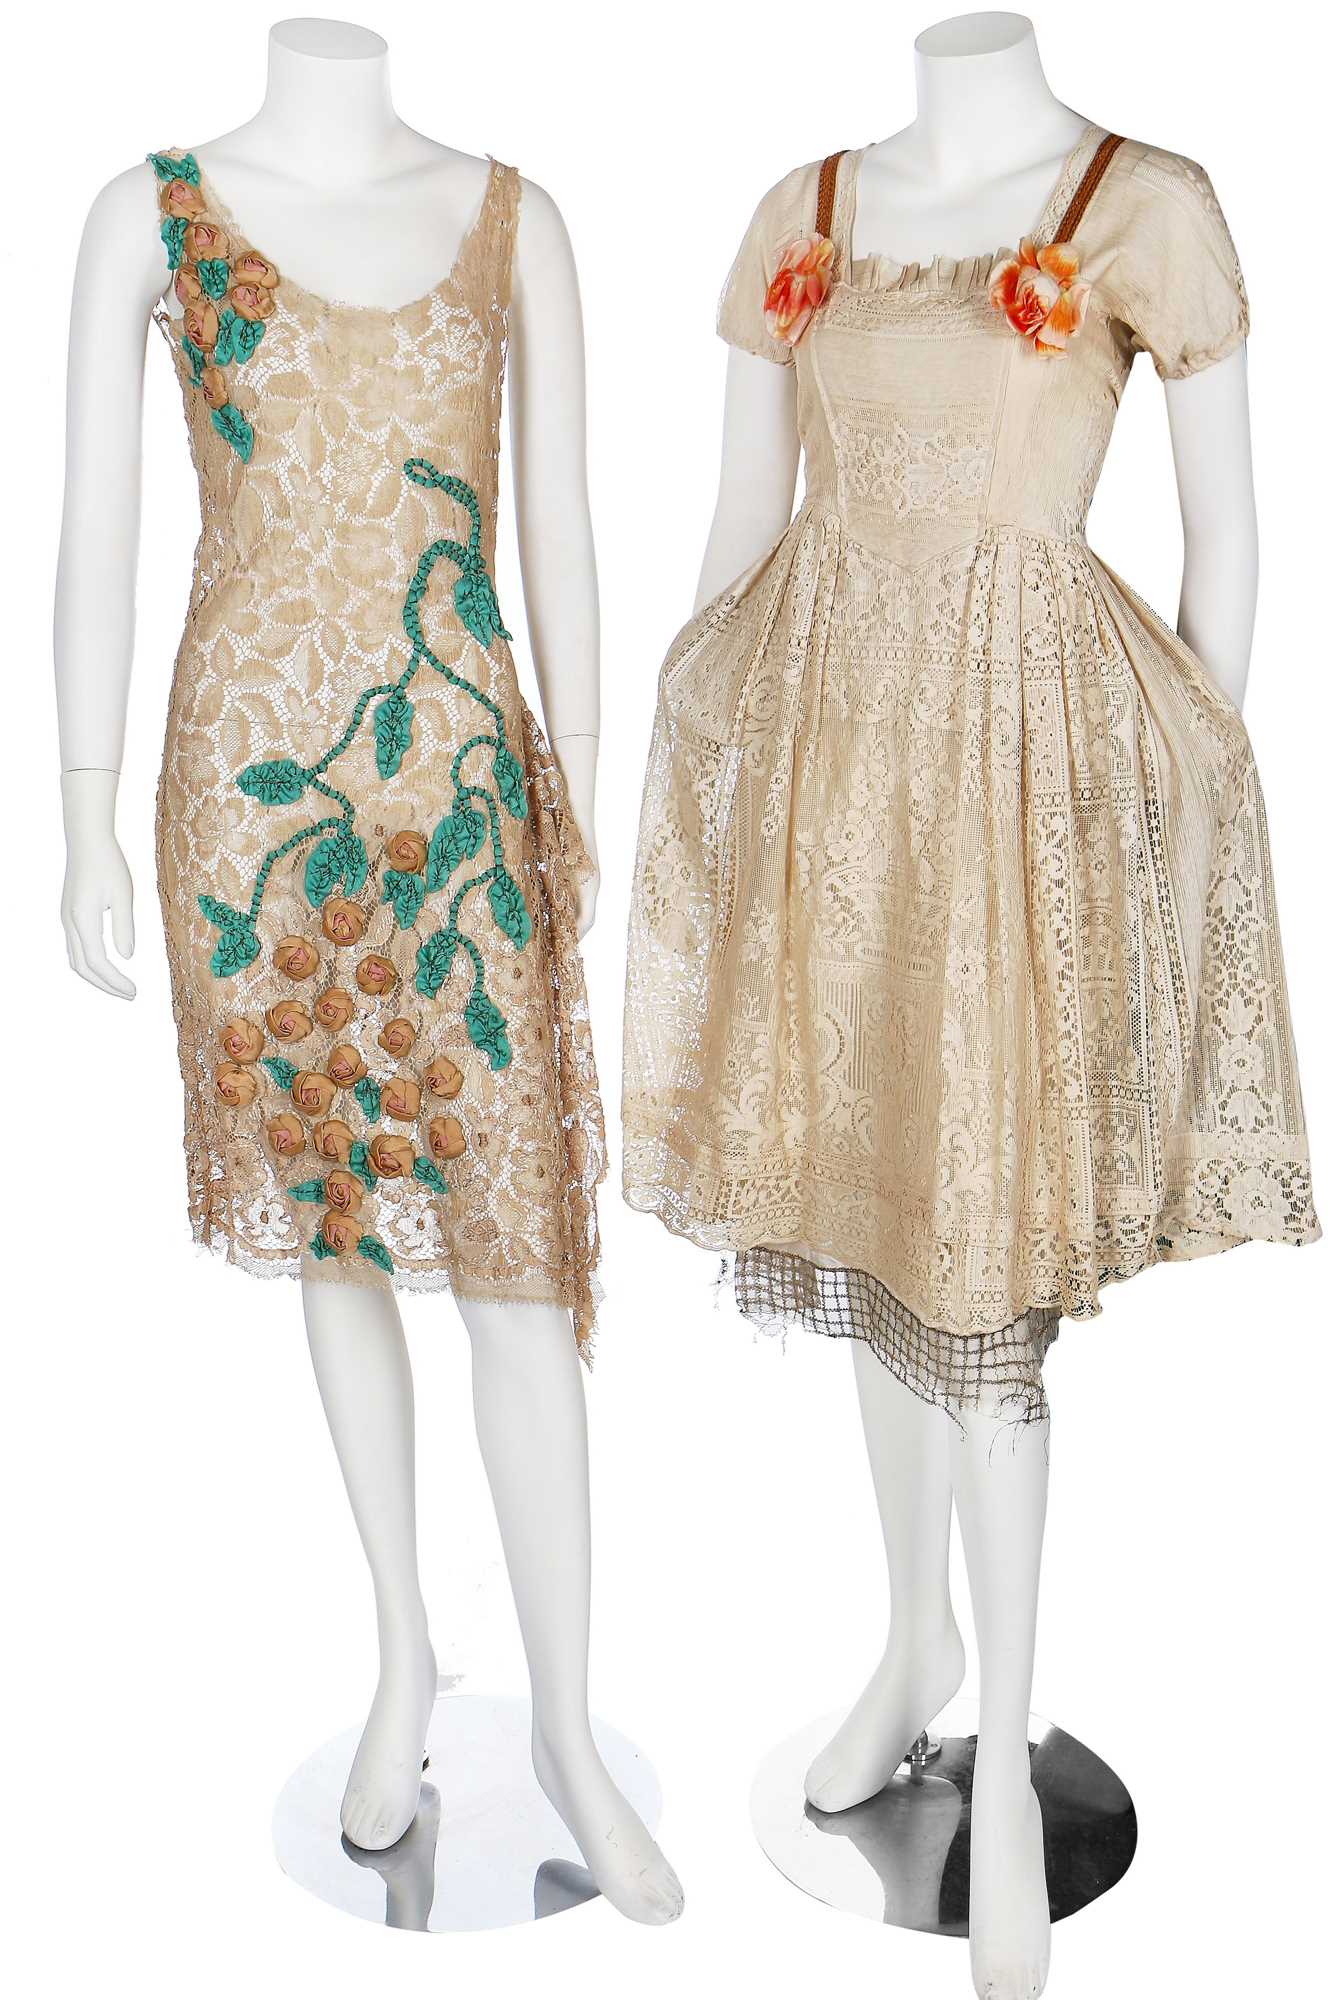 Lot 17 - Ten lace and white-worked summer dresses, 1920-30s